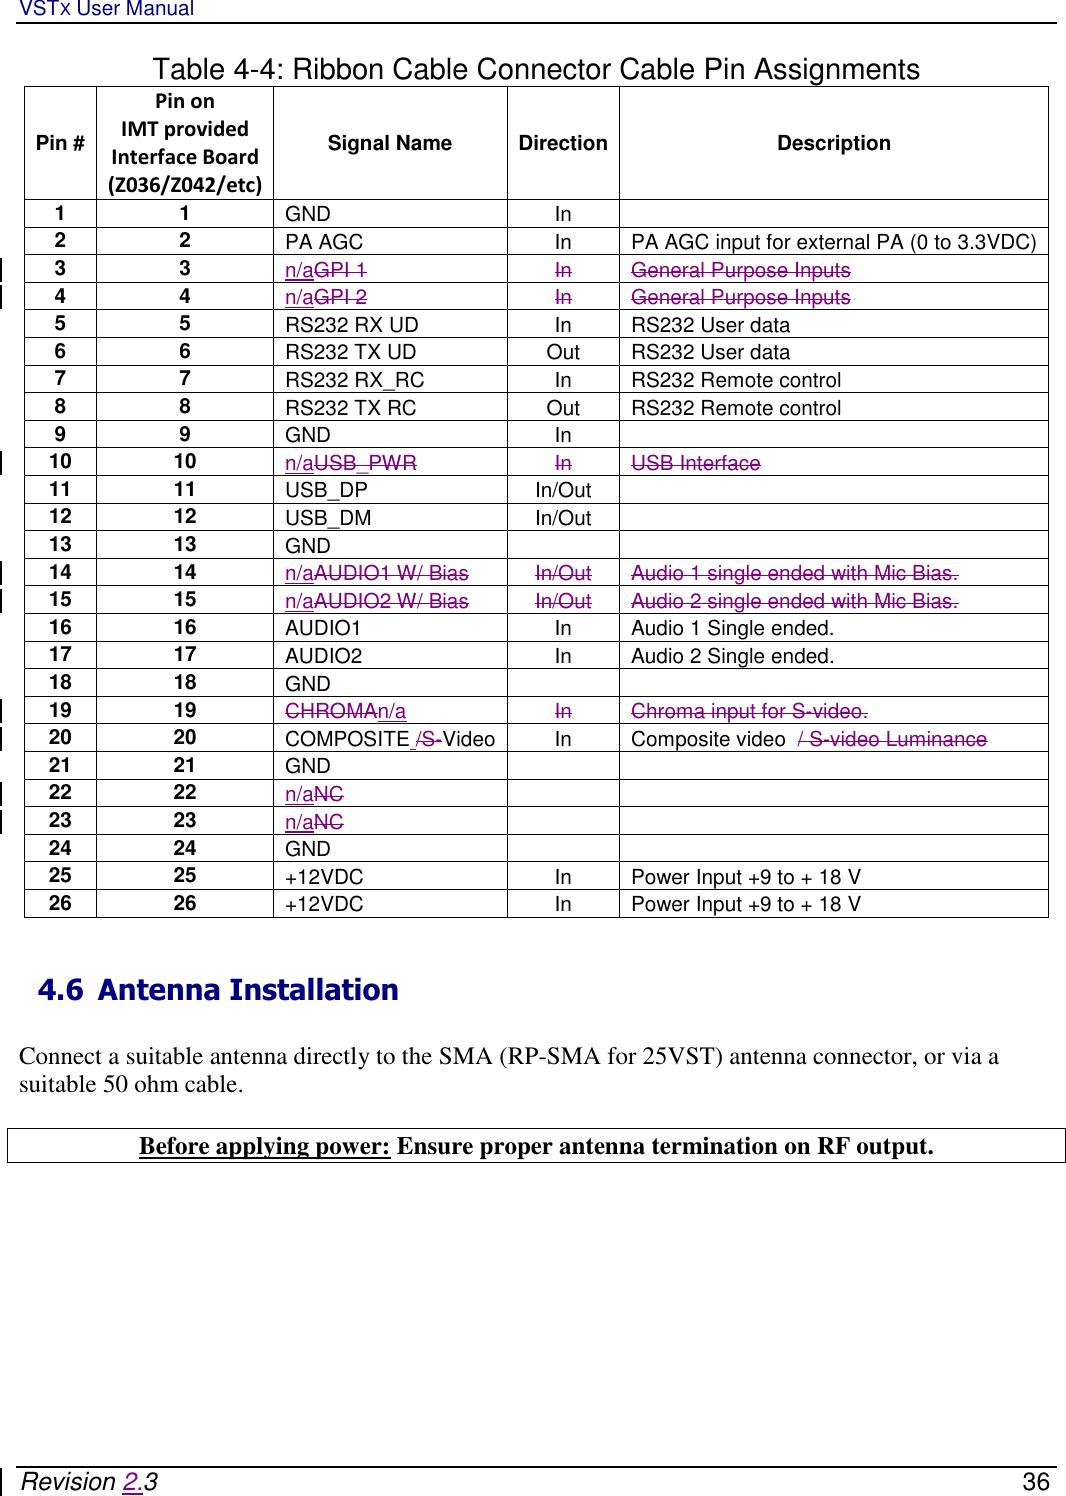 VSTX User Manual   Revision 2.3    36 Table 4-4: Ribbon Cable Connector Cable Pin Assignments Pin # Pin on  IMT provided  Interface Board (Z036/Z042/etc) Signal Name Direction Description 1 1 GND In   2 2 PA AGC In PA AGC input for external PA (0 to 3.3VDC) 3 3 n/aGPI 1 In General Purpose Inputs 4 4 n/aGPI 2 In General Purpose Inputs 5 5 RS232 RX UD In RS232 User data 6 6 RS232 TX UD Out RS232 User data 7 7 RS232 RX_RC In RS232 Remote control 8 8 RS232 TX RC Out RS232 Remote control 9 9 GND In   10 10 n/aUSB_PWR In USB Interface 11 11 USB_DP In/Out   12 12 USB_DM In/Out   13 13 GND     14 14 n/aAUDIO1 W/ Bias In/Out Audio 1 single ended with Mic Bias. 15 15 n/aAUDIO2 W/ Bias In/Out Audio 2 single ended with Mic Bias. 16 16 AUDIO1 In Audio 1 Single ended. 17 17 AUDIO2 In Audio 2 Single ended. 18 18 GND     19 19 CHROMAn/a In Chroma input for S-video.  20 20 COMPOSITE /S-Video In Composite video  / S-video Luminance 21 21 GND     22 22 n/aNC   23 23 n/aNC   24 24 GND     25 25 +12VDC In Power Input +9 to + 18 V 26 26 +12VDC In Power Input +9 to + 18 V  4.6 Antenna Installation  Connect a suitable antenna directly to the SMA (RP-SMA for 25VST) antenna connector, or via a suitable 50 ohm cable.  Before applying power: Ensure proper antenna termination on RF output.      